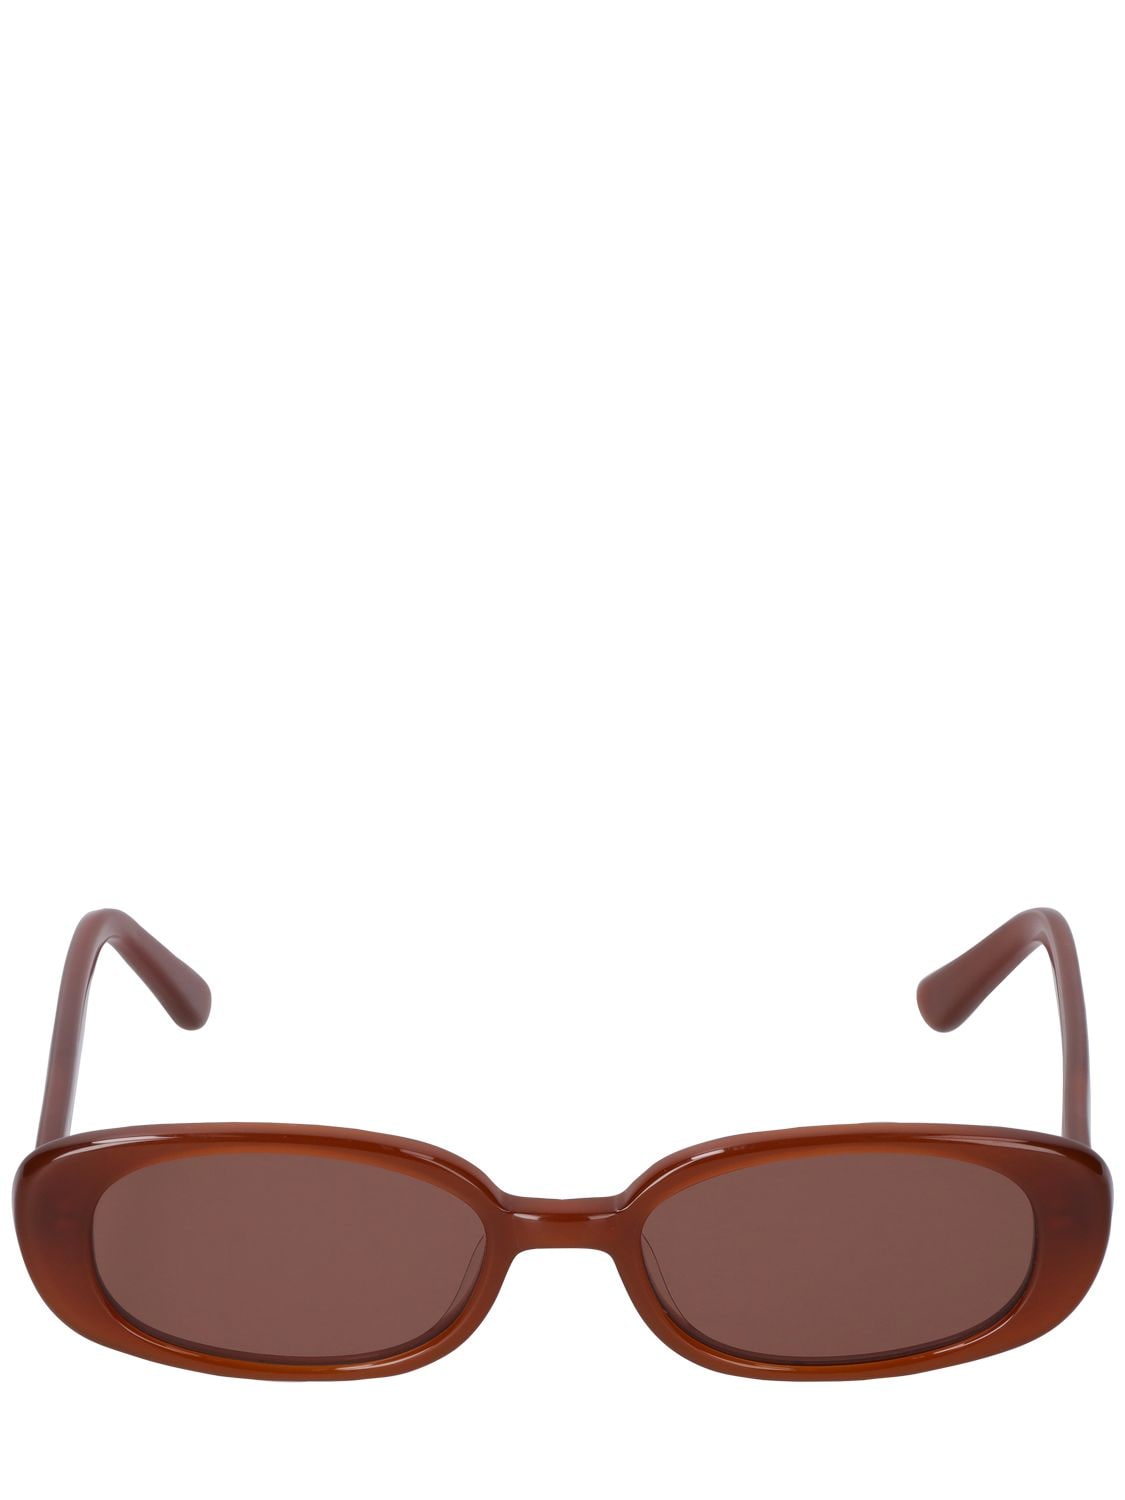 Shop Velvet Canyon Velvetines Oval Acetate Sunglasses In Chocolate,brown